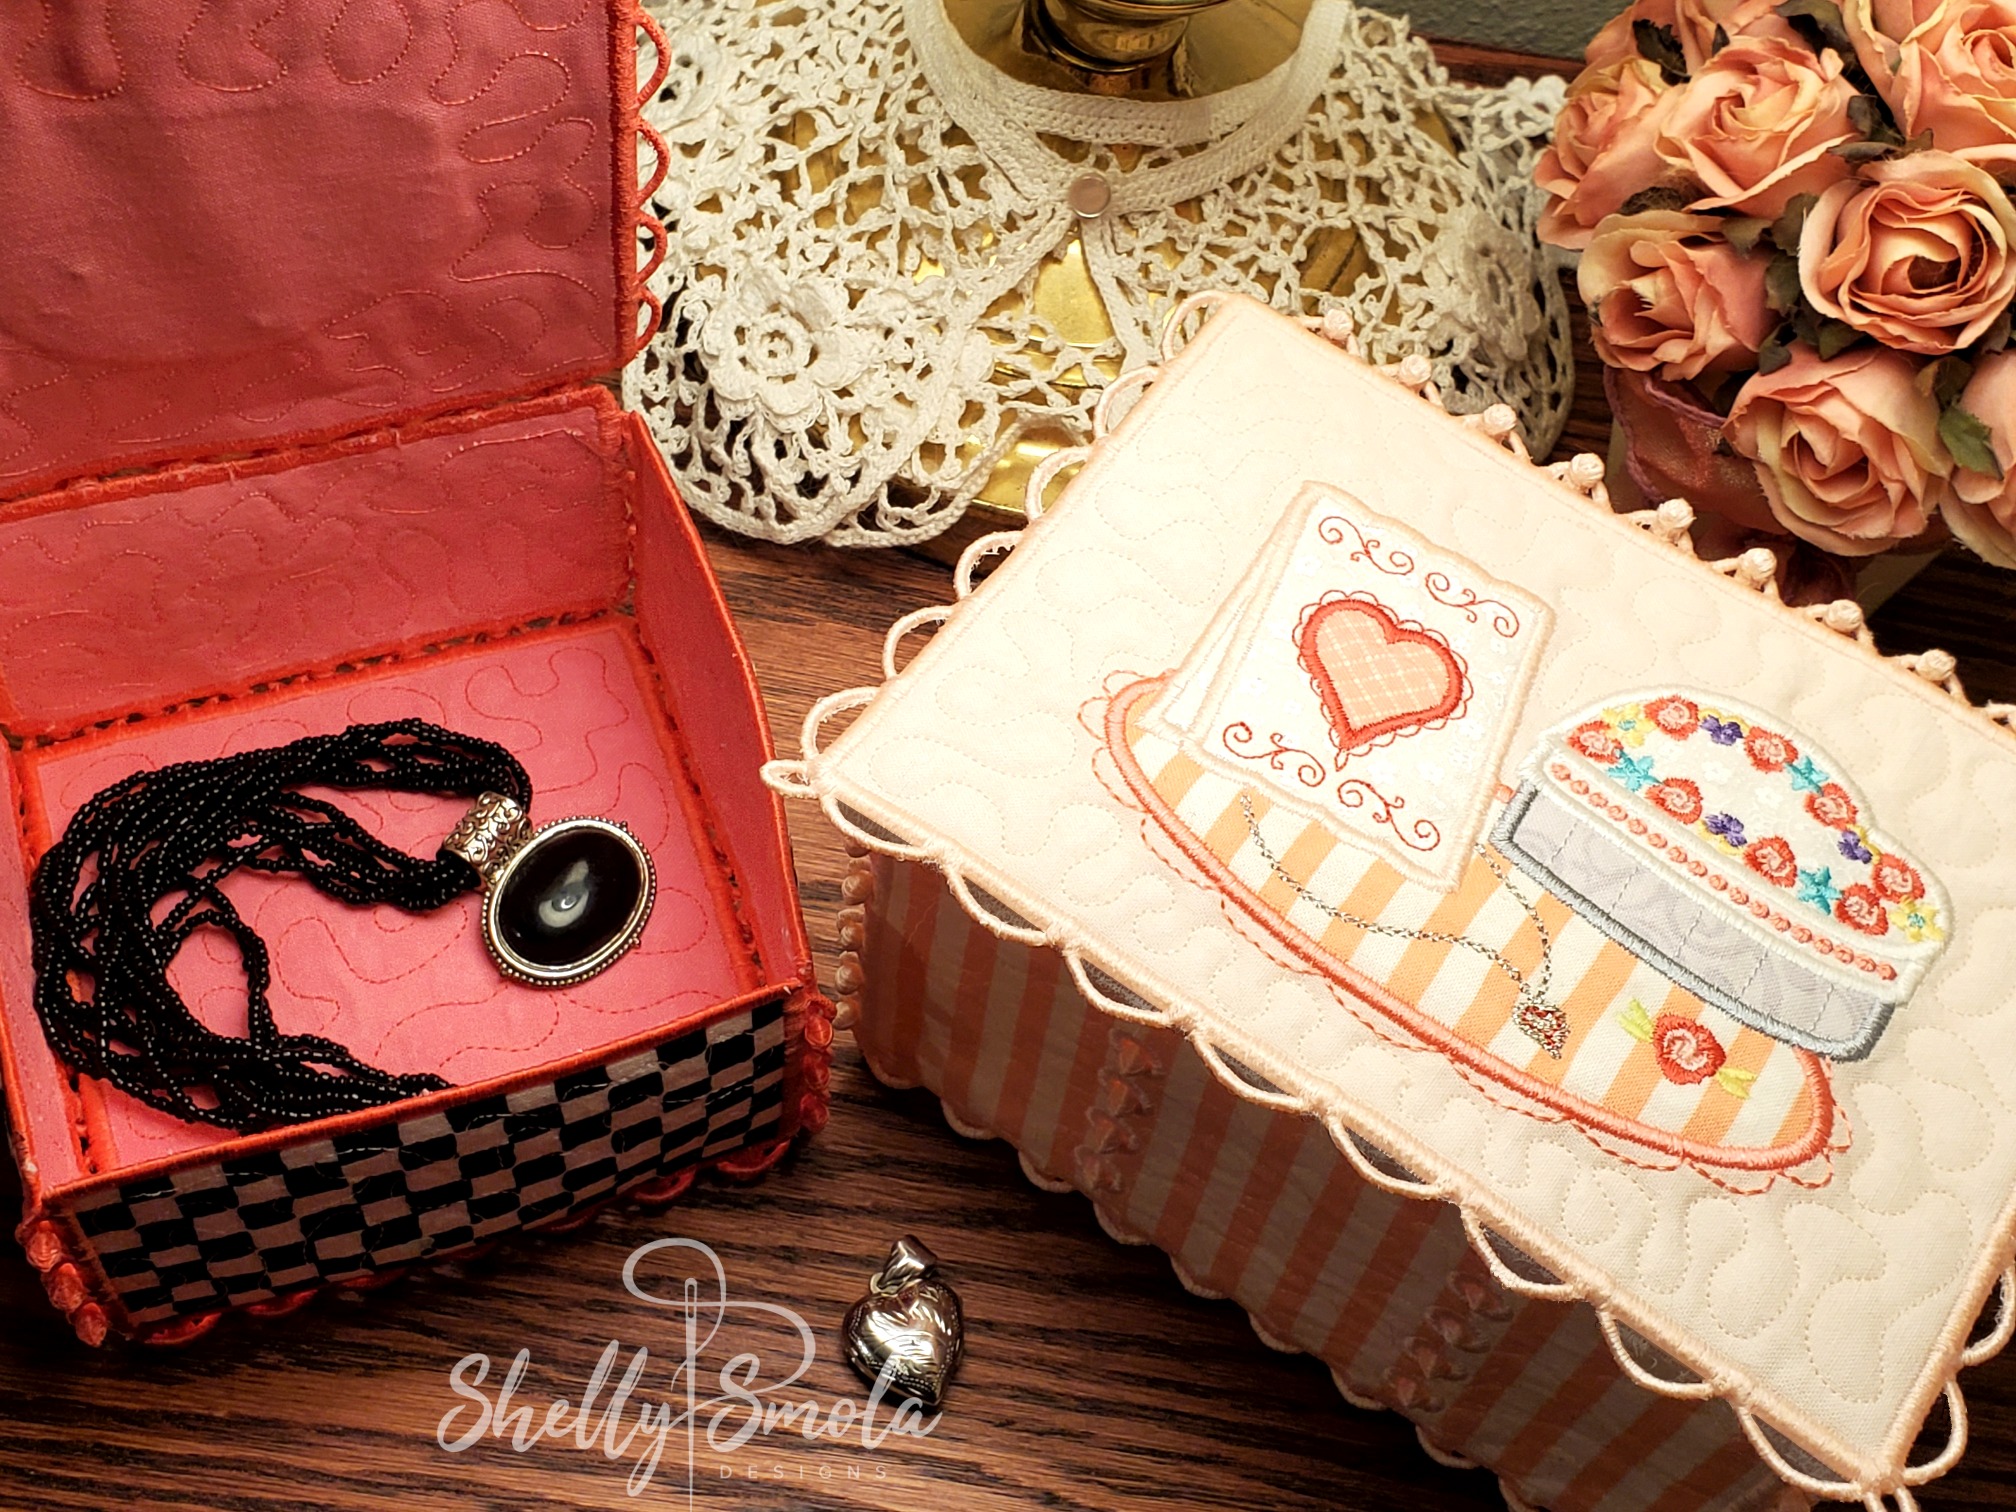 Sweetheart Trinket Boxes by Shelly Smola